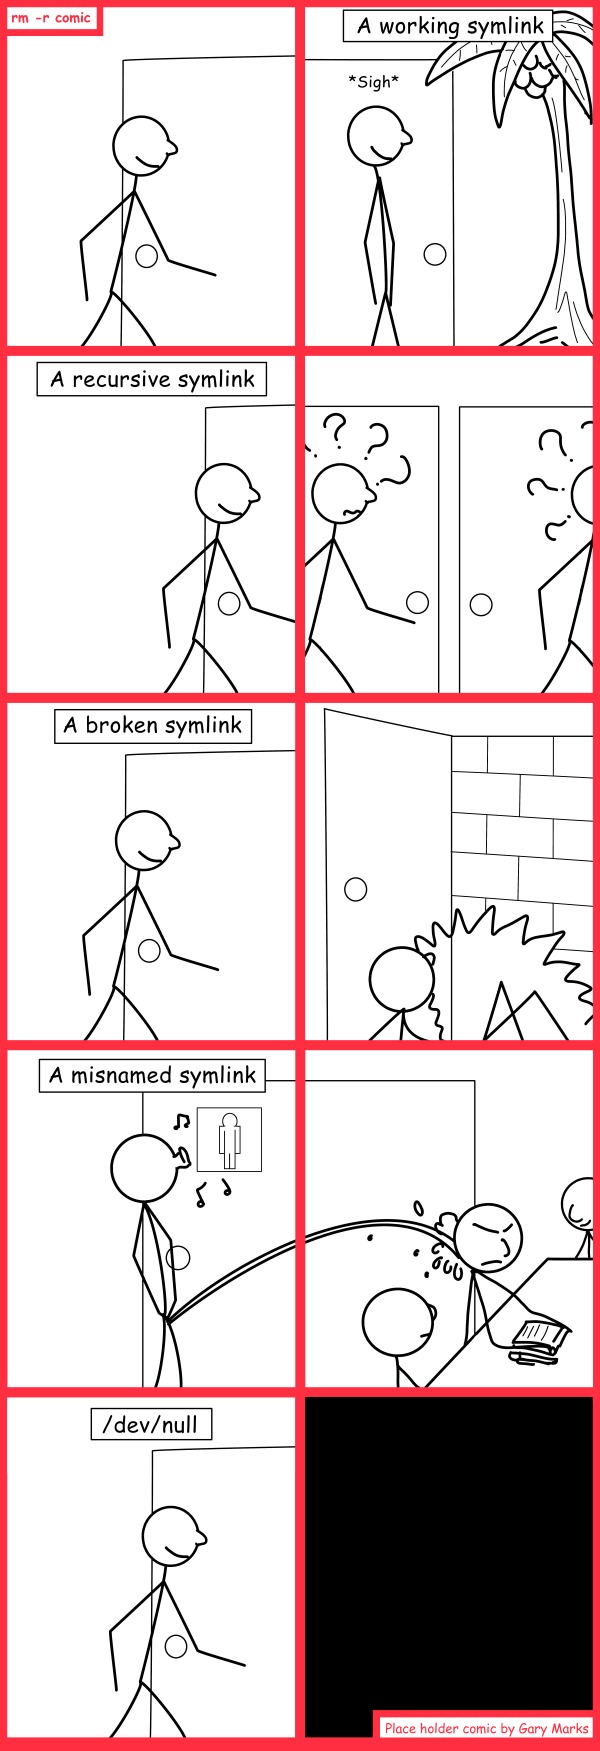 Remove R Comic (aka rm -r comic), by Gary Marks: A sticky guide to symbolic links 
Dialog: 
This is a symbolic comic. 
 
Panel 2 
Caption: A working symlink 
Mr.Stickin: *sigh* 
Panel 3 
Caption: A recursive symlink 
Panel 5 
Caption: A broken symlink 
Panel 7 
Caption: A misnamed symlink 
Panel 9 
Caption: /dev/null/ 